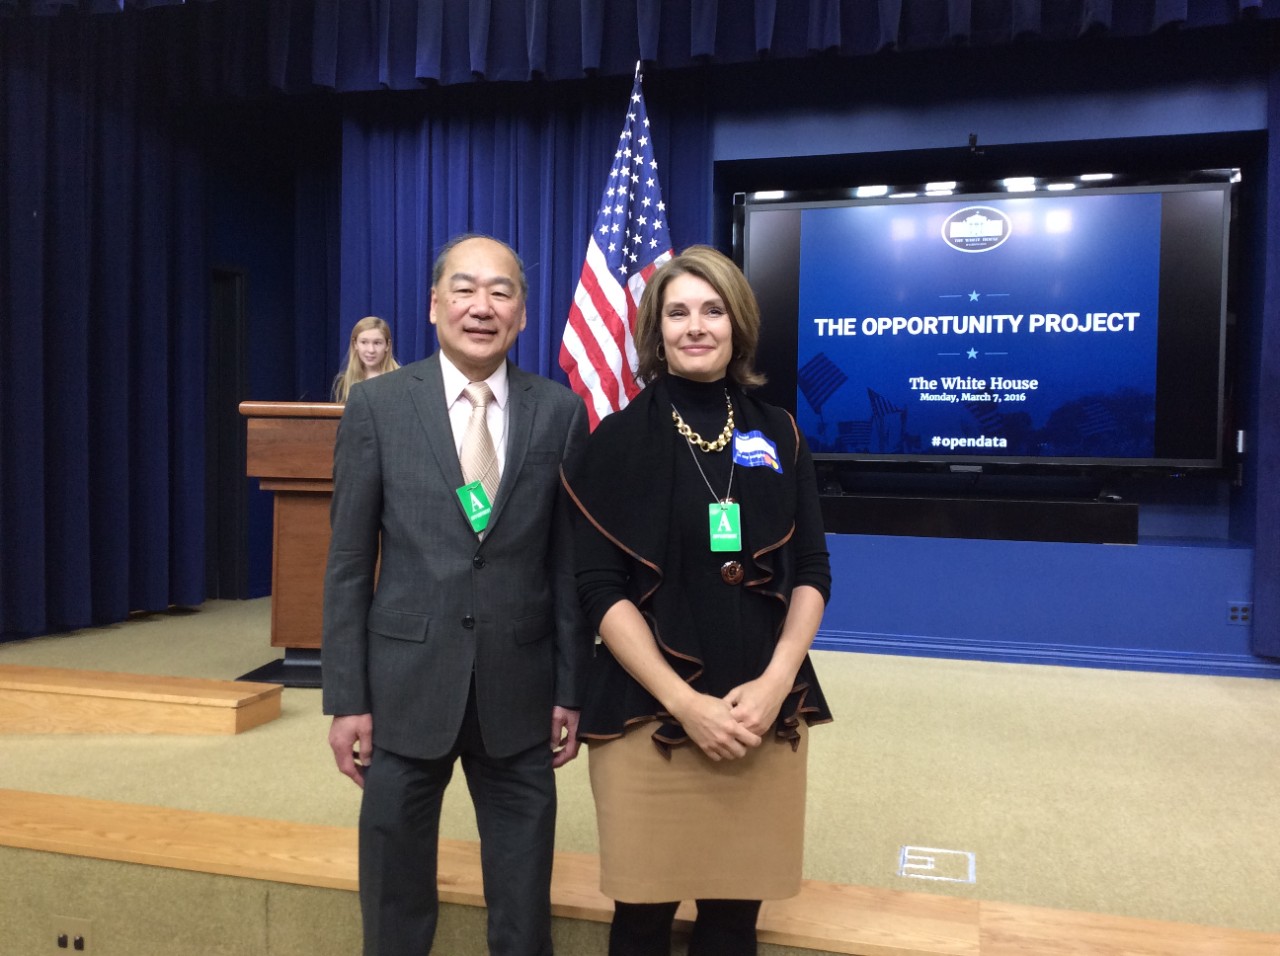 David Takeuchi and Tiziana Dearing representing BC Social Work initiative RISE at The White House, March 7, 2016.